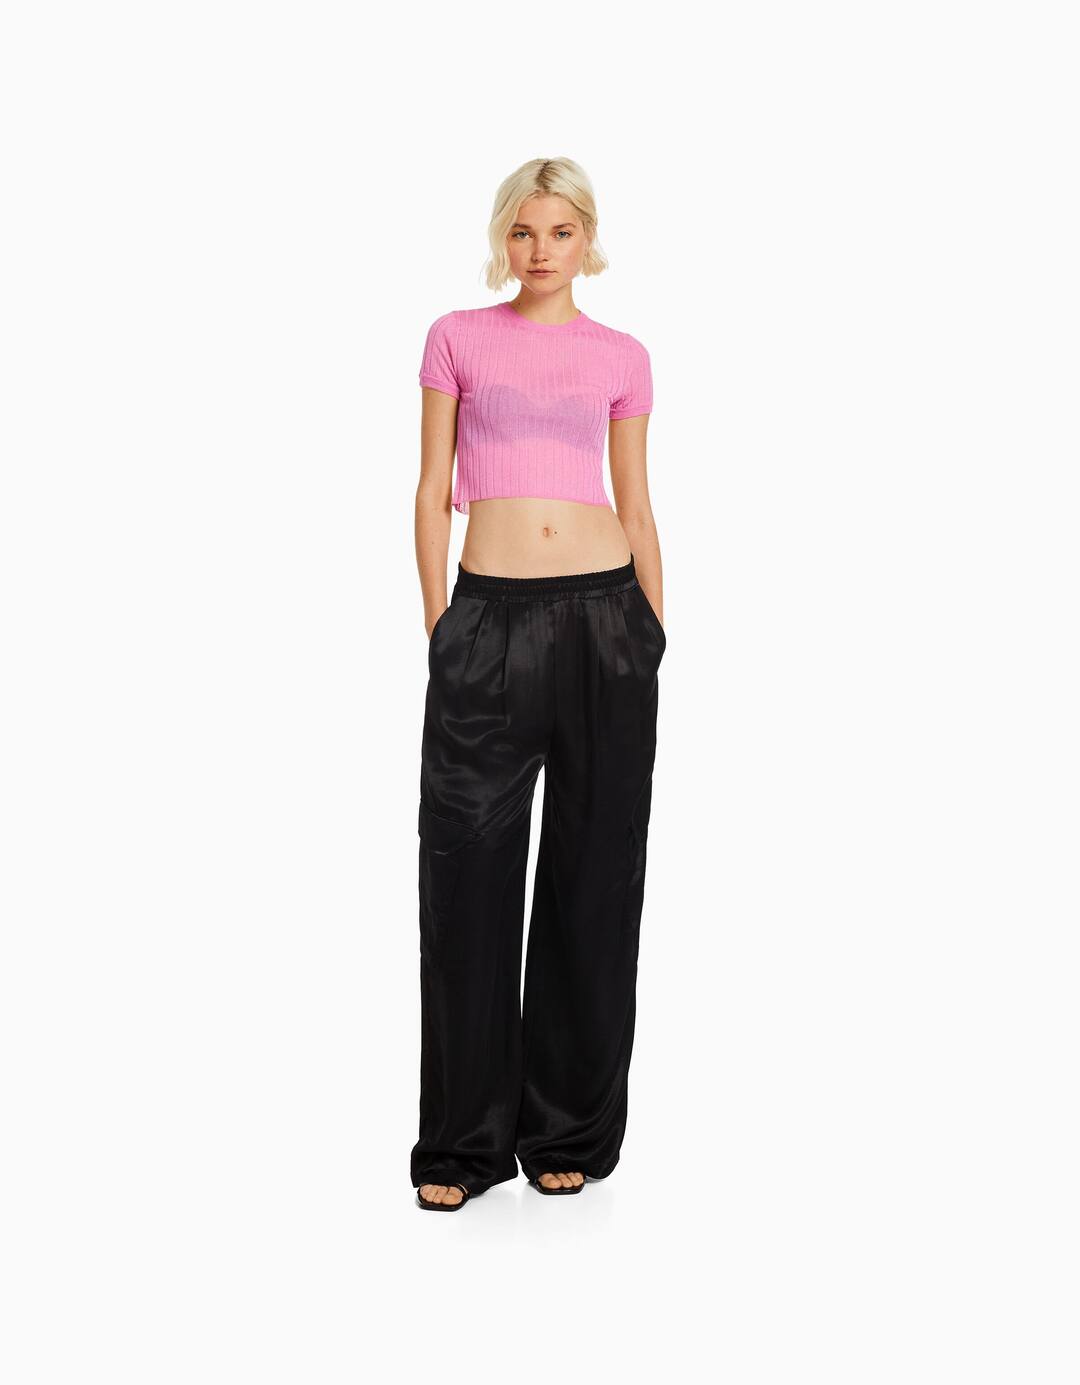 Wide-leg satin trousers with pockets